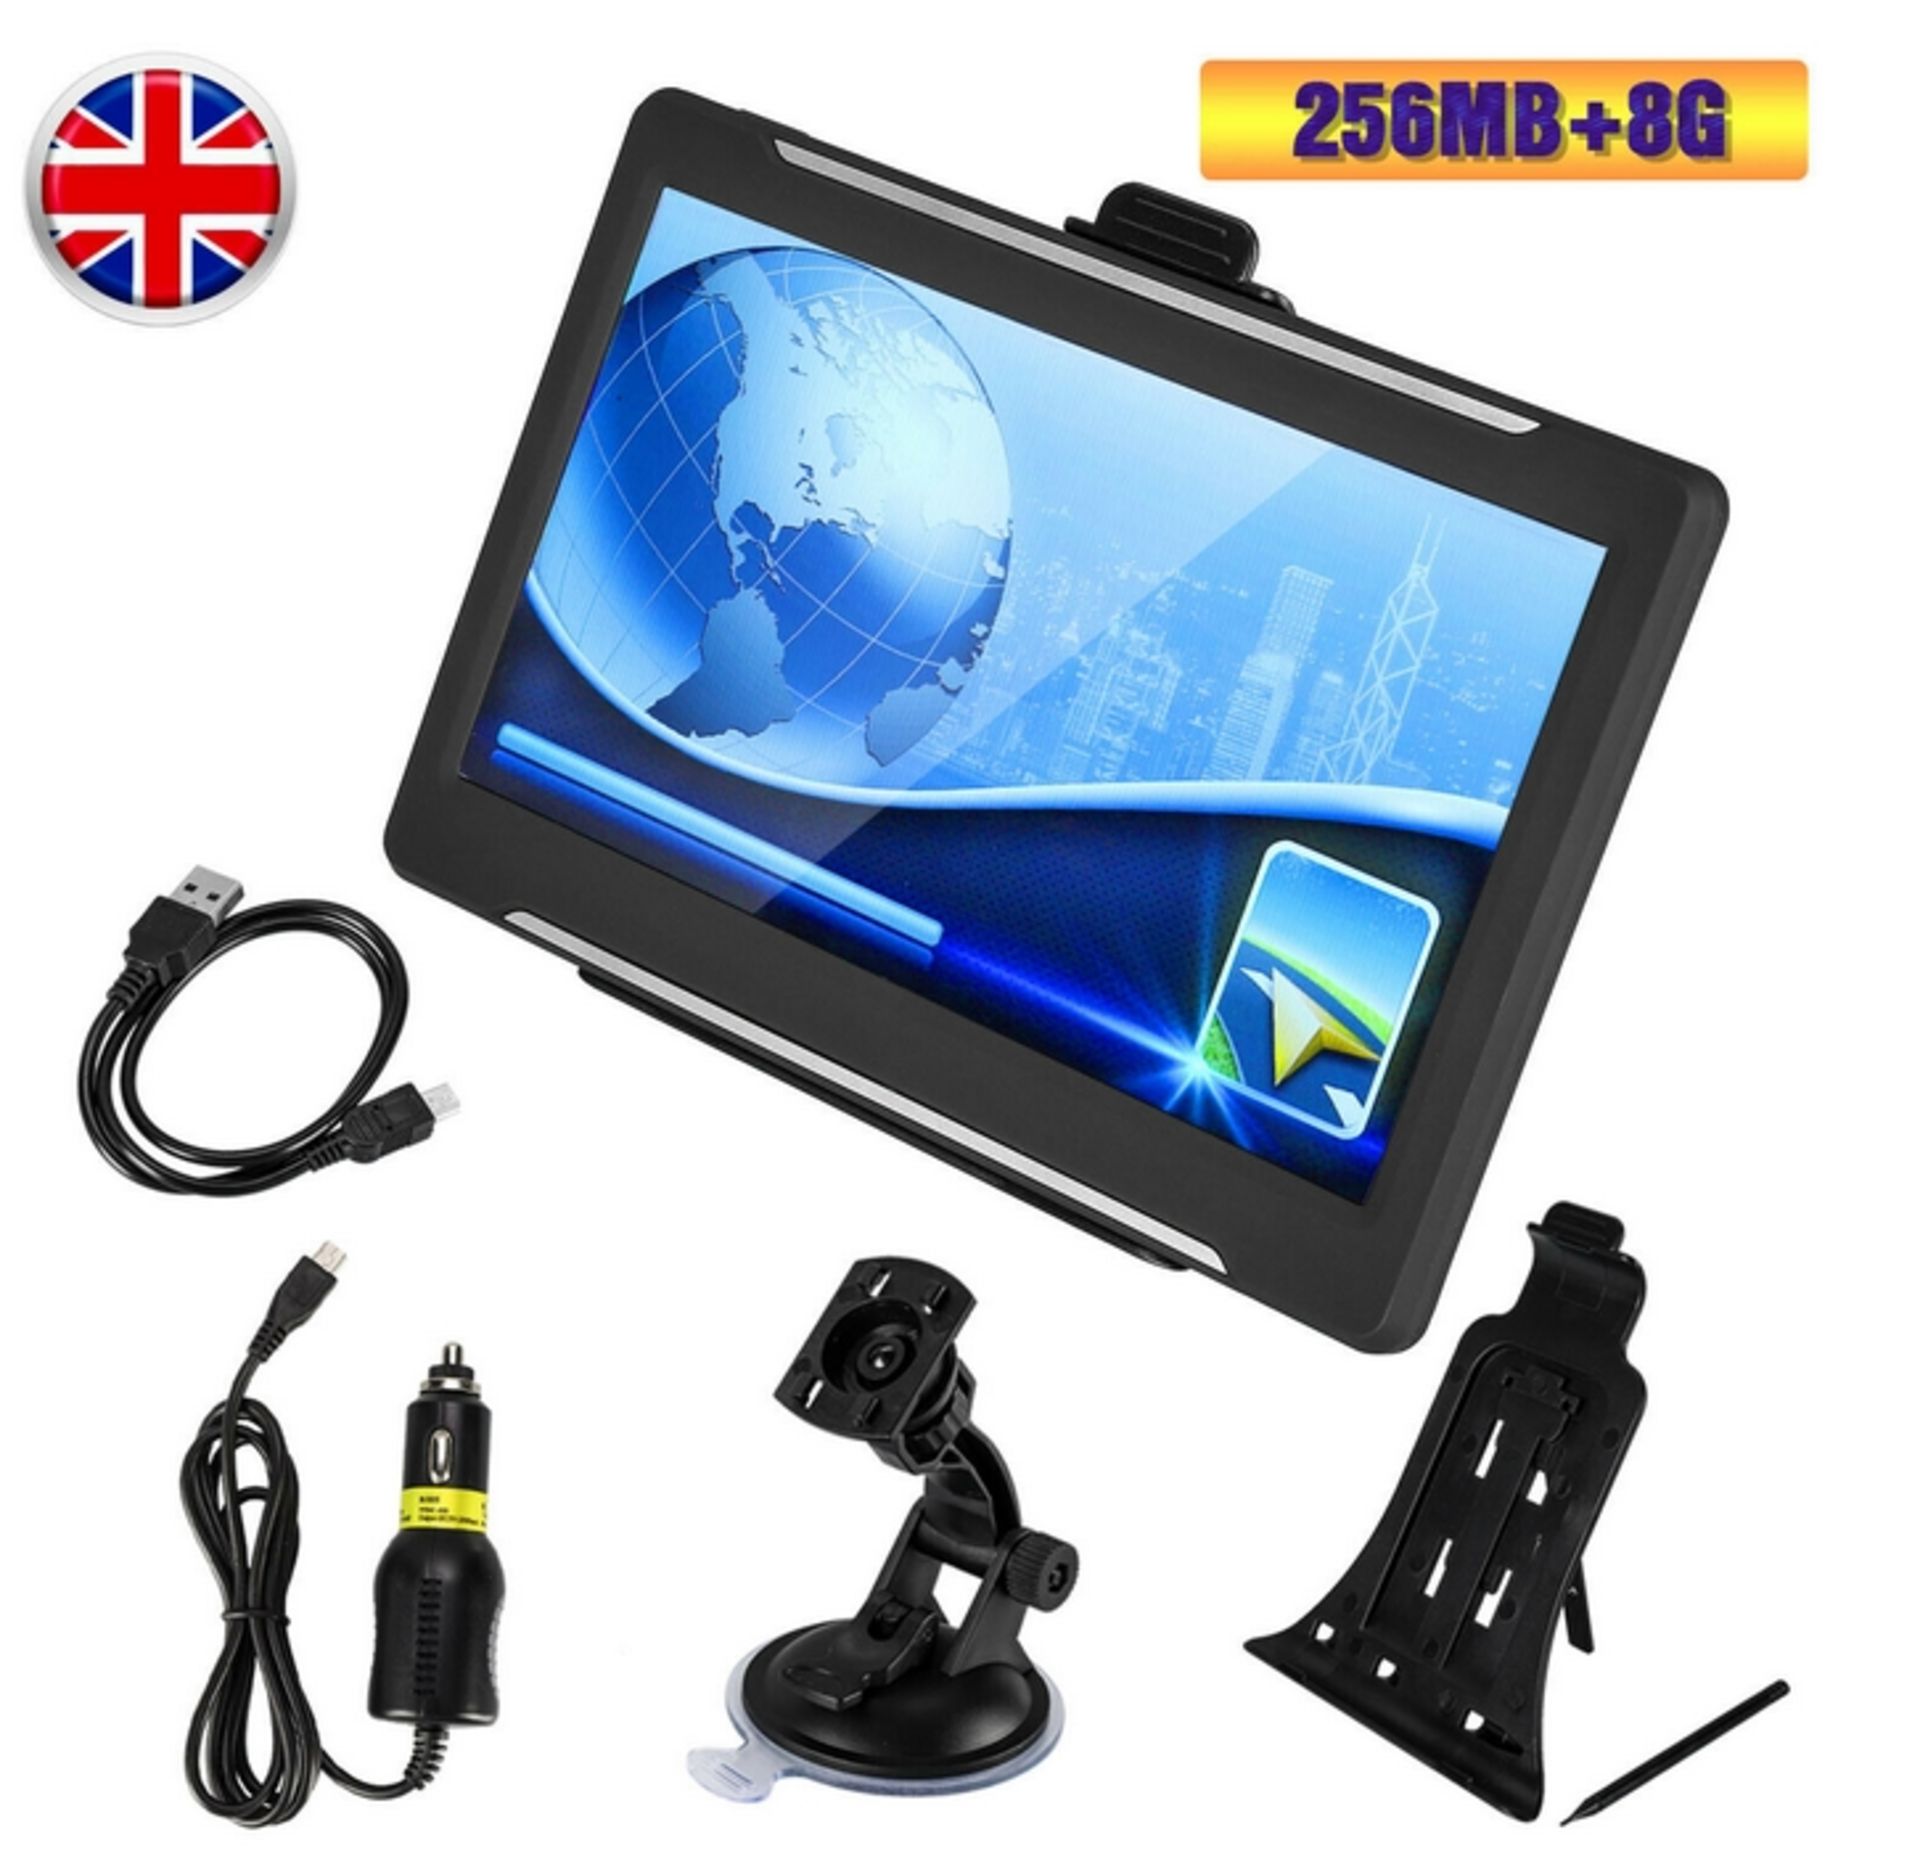 Sat Nav Multimedia System, Excellent Quality And Easy To Use.